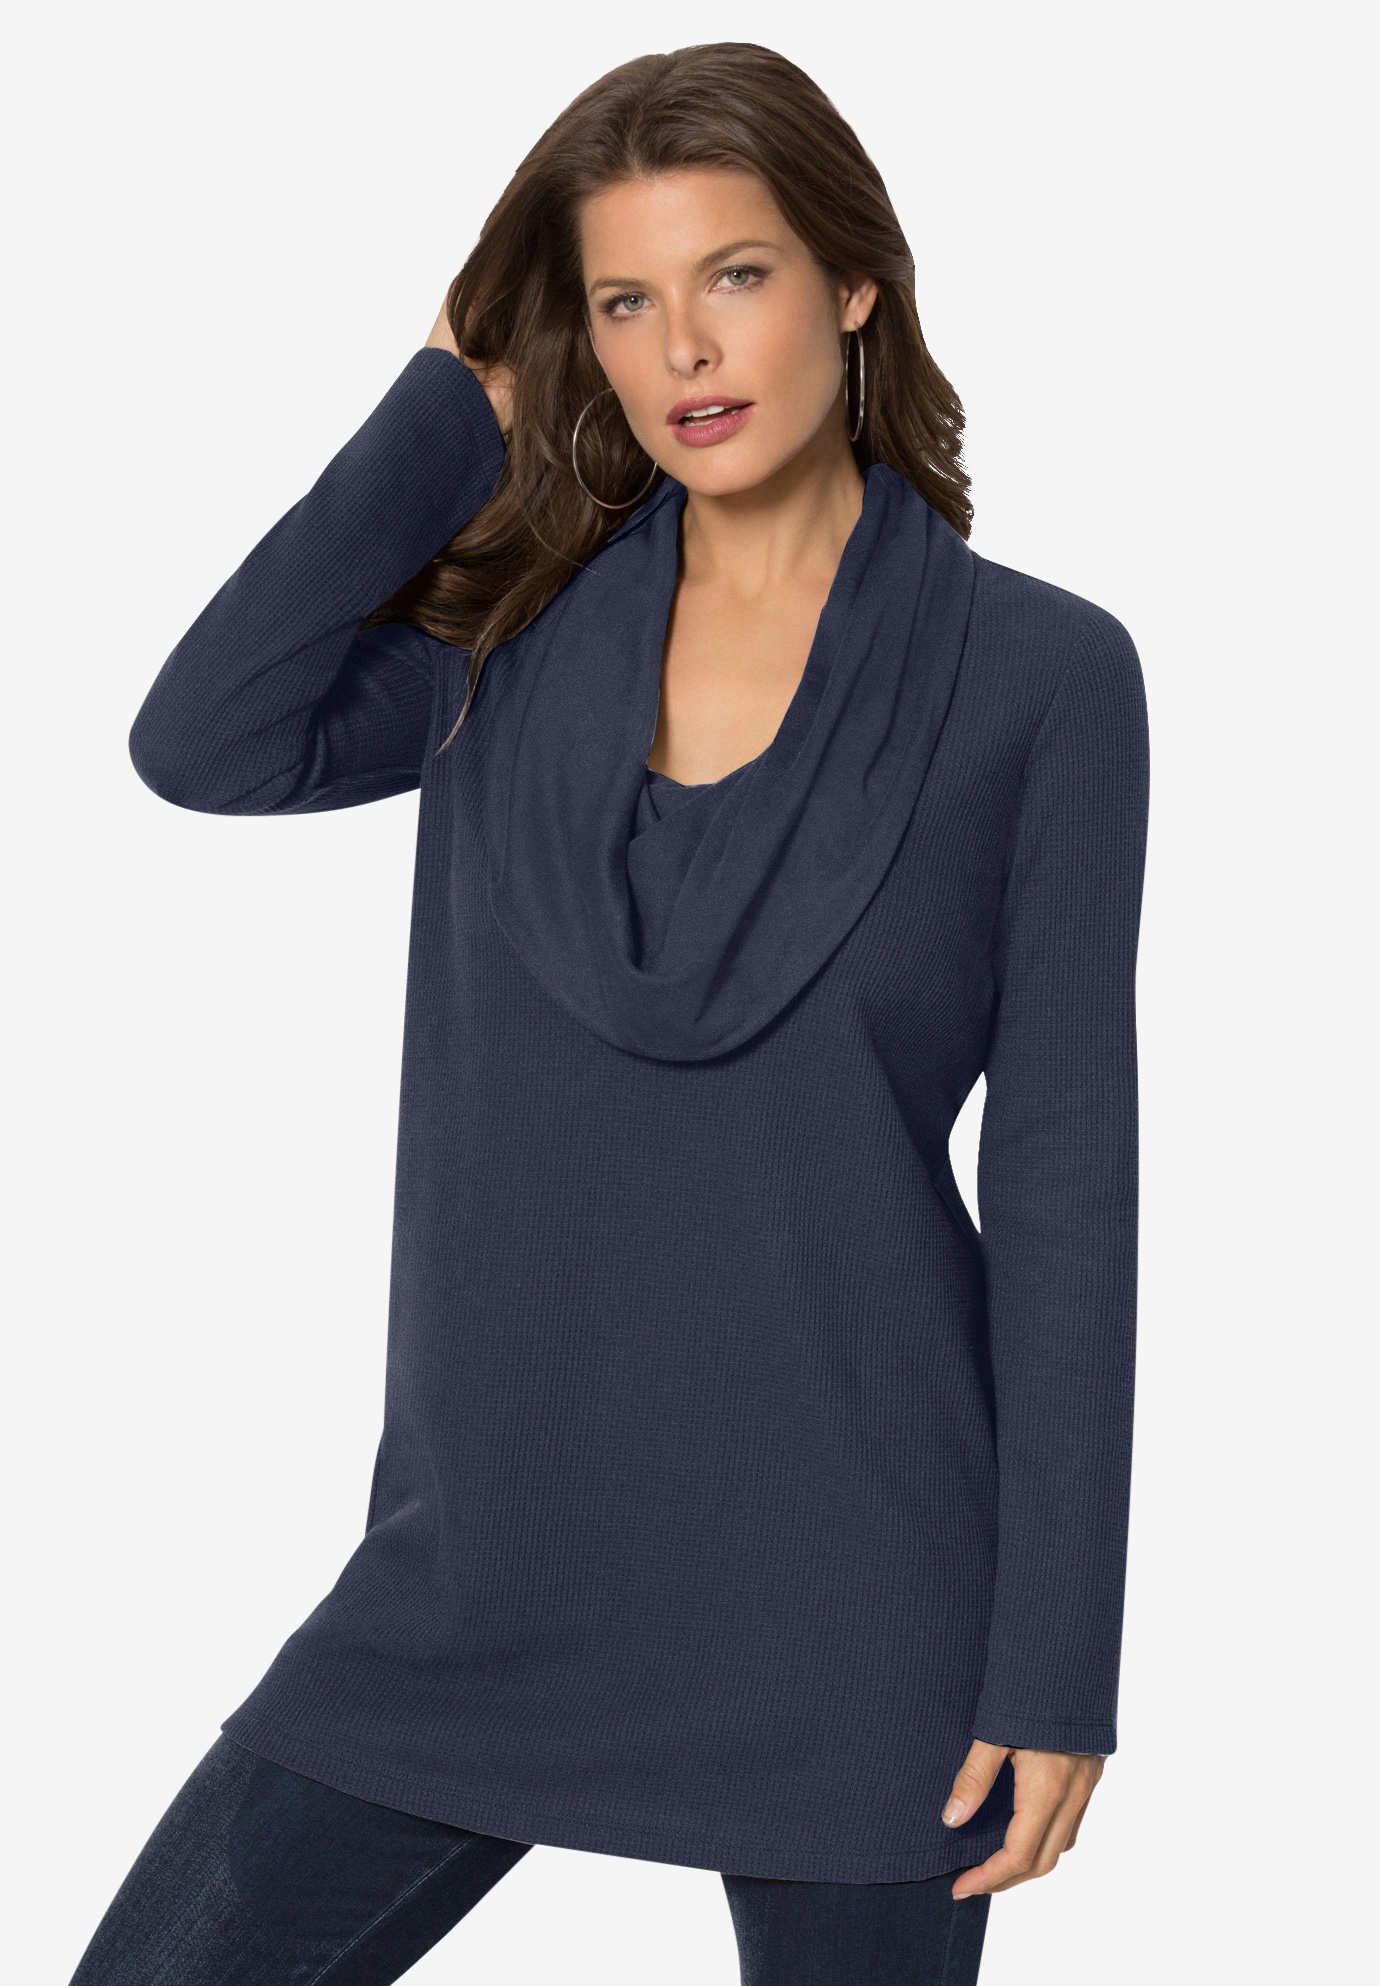 Thermal Knit Cowl Neck Tunic| Plus Size BOGO 60% OFF TOPS | Ellos